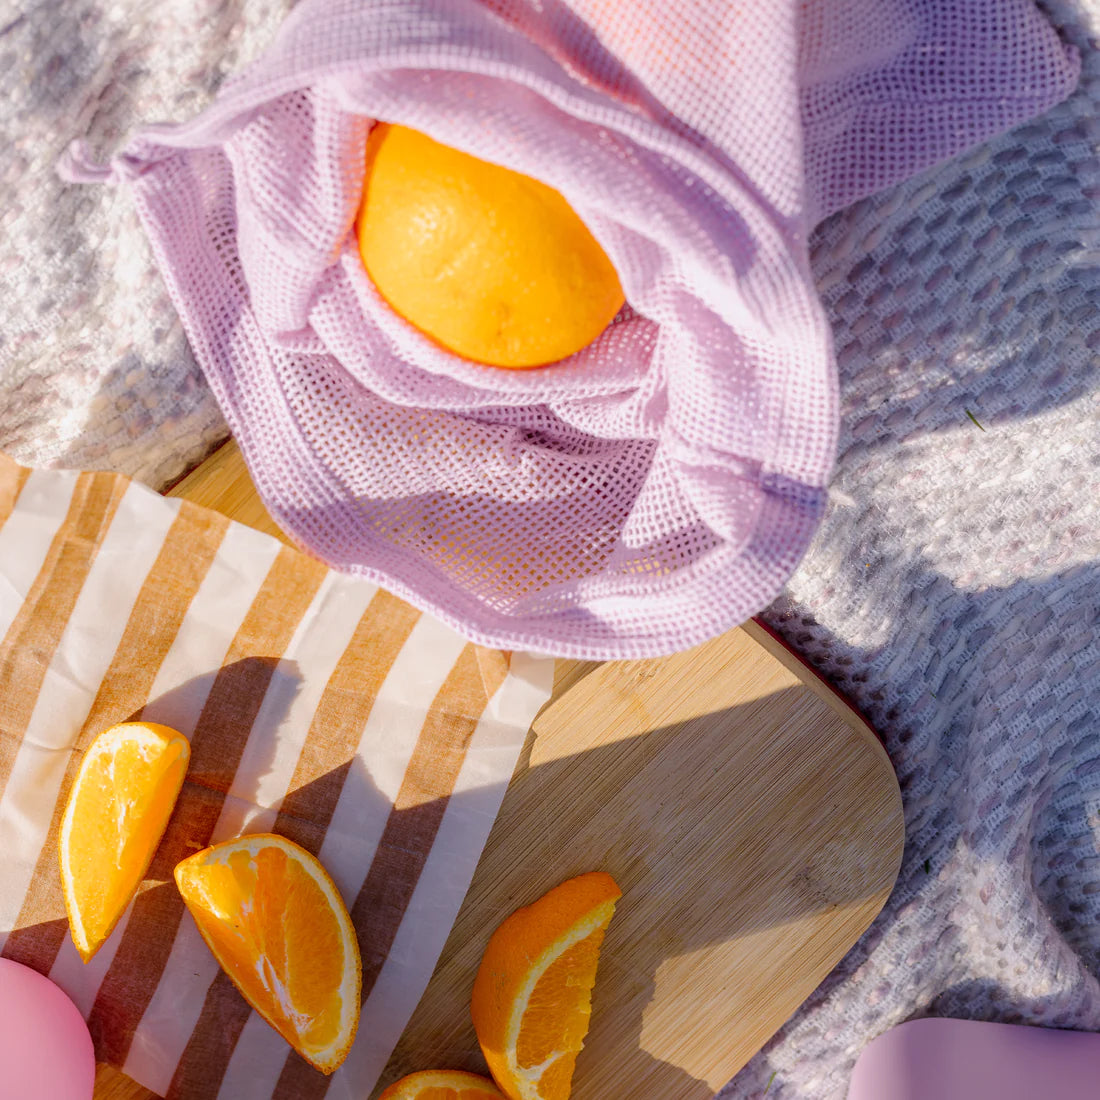 Picnic set up with a chopping board, oranges and market bag.